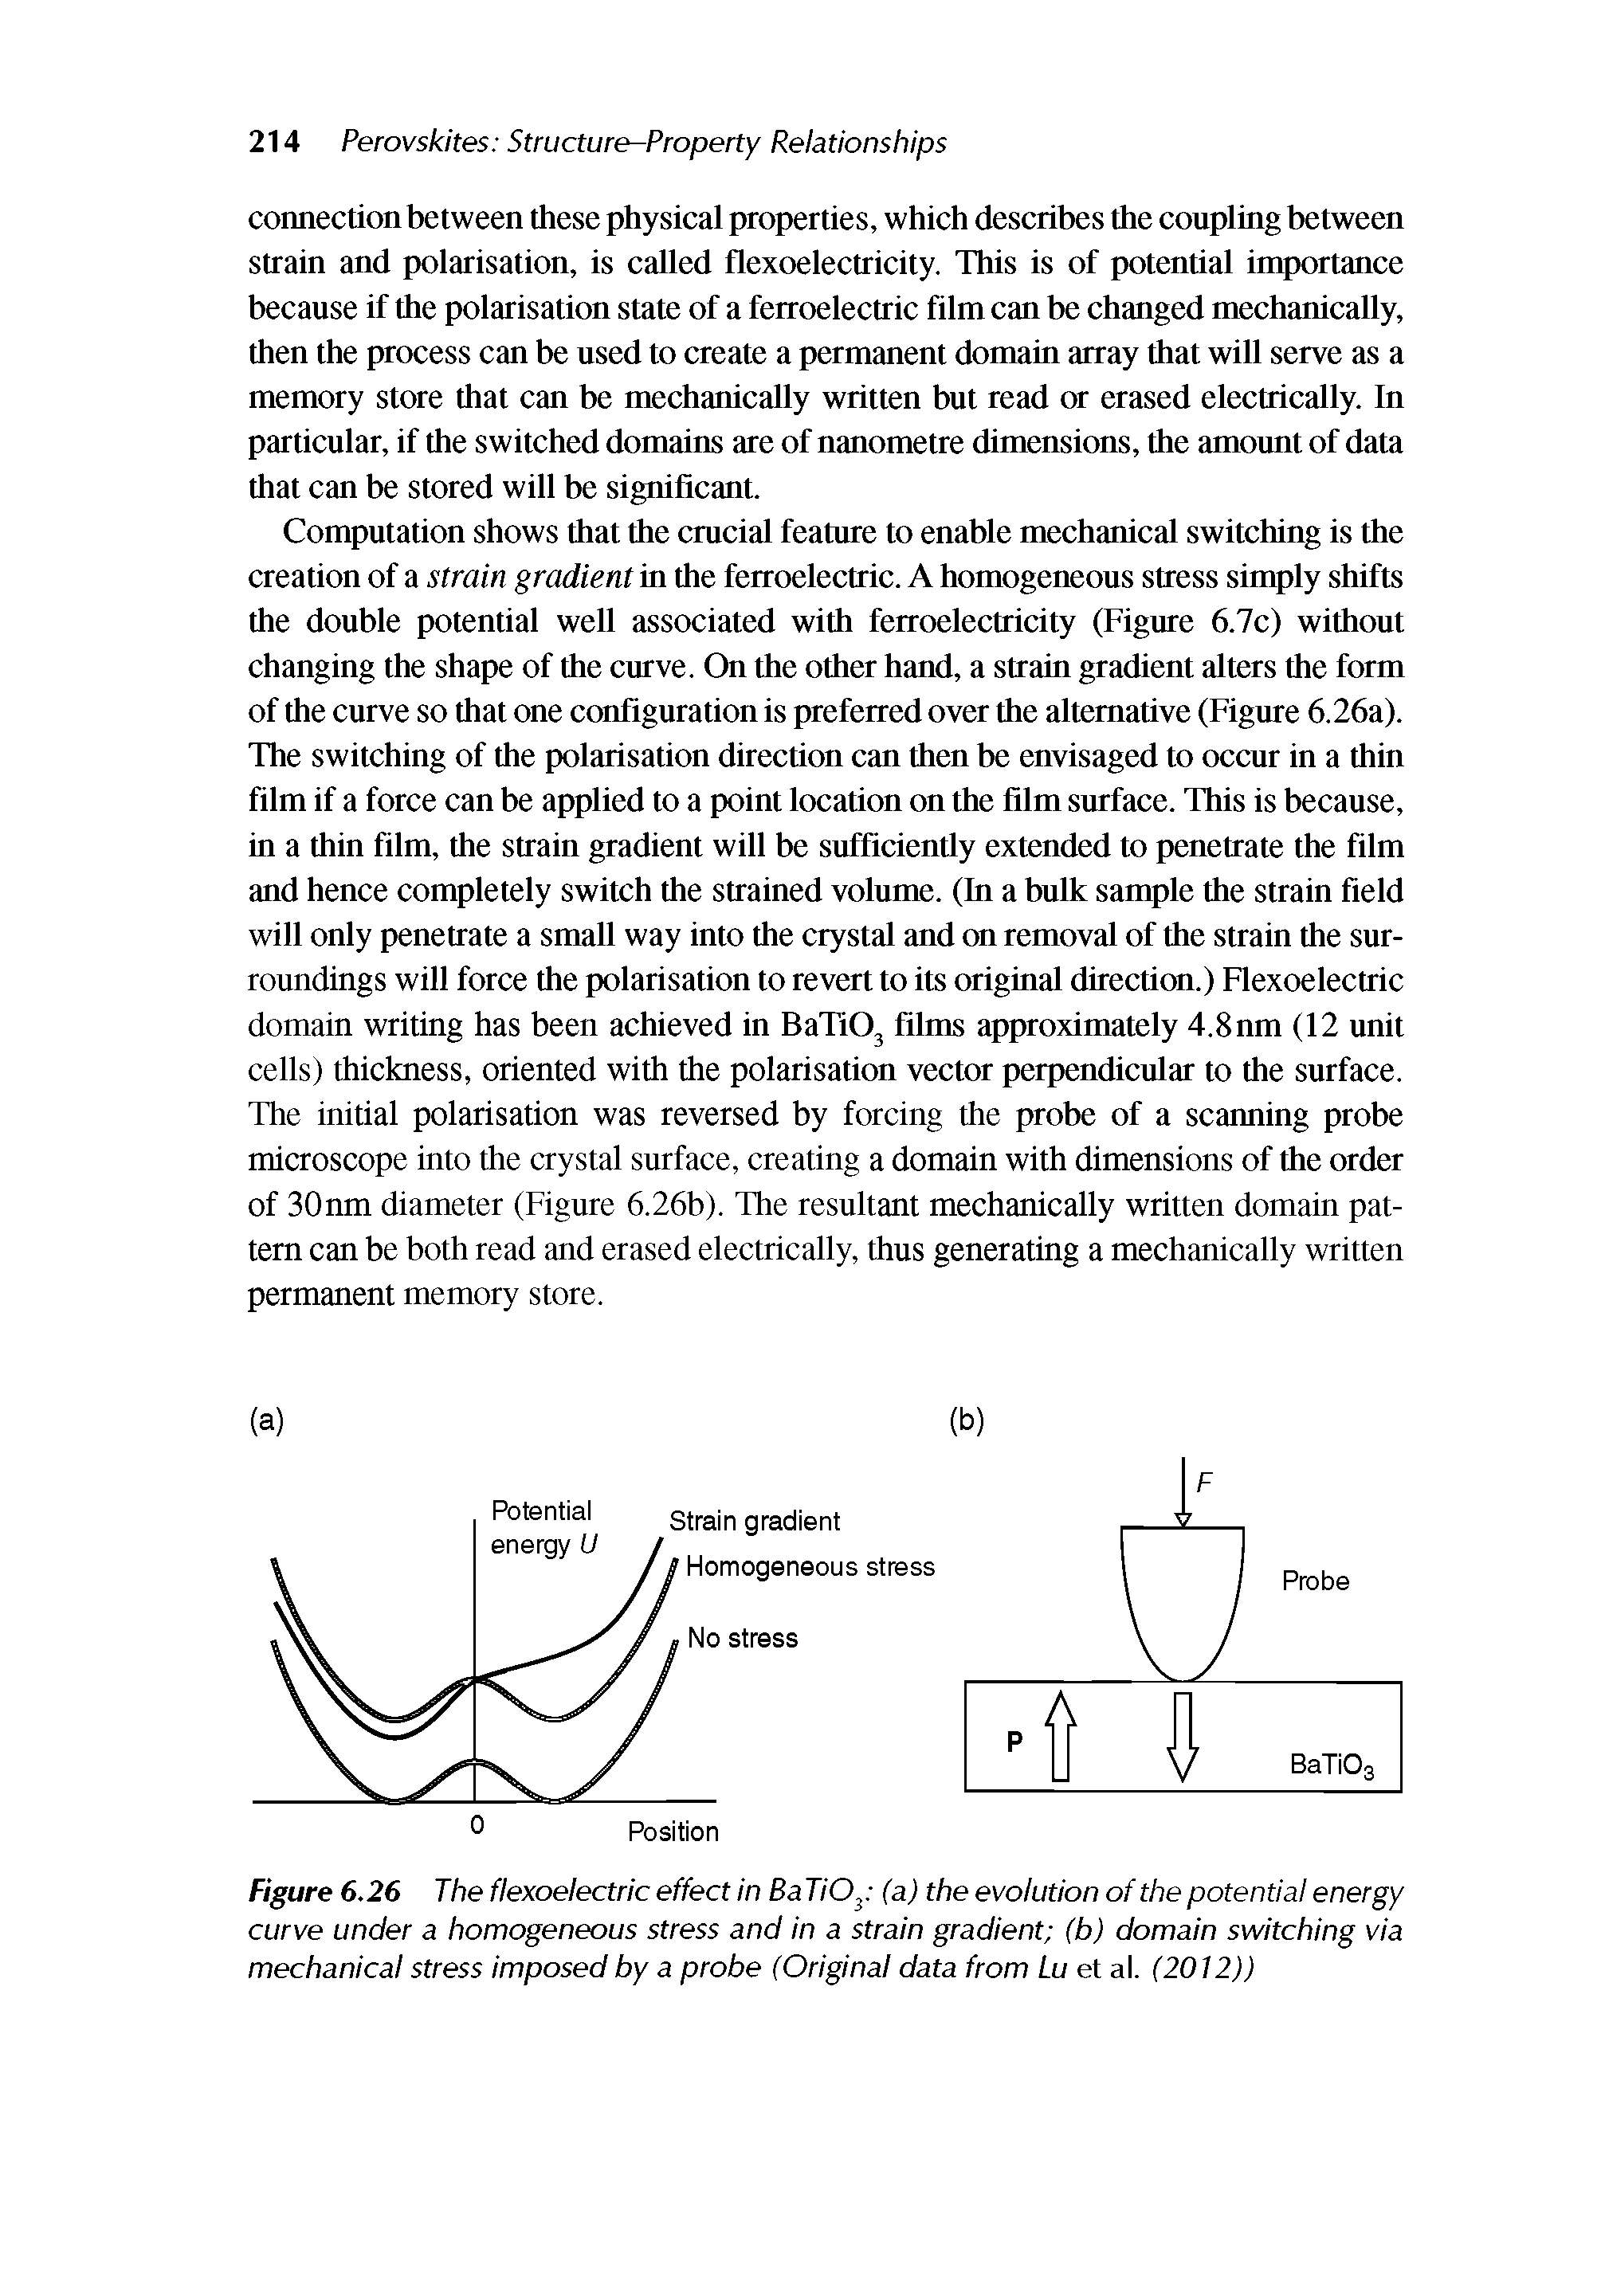 Figure 6.26 The flexoelectric effect in BaTiO (a) the evolution of the potential energy curve under a homogeneous stress and in a strain gradient (b) domain switching via mechanical stress imposed by a probe (Original data from Lu et al. (2012))...